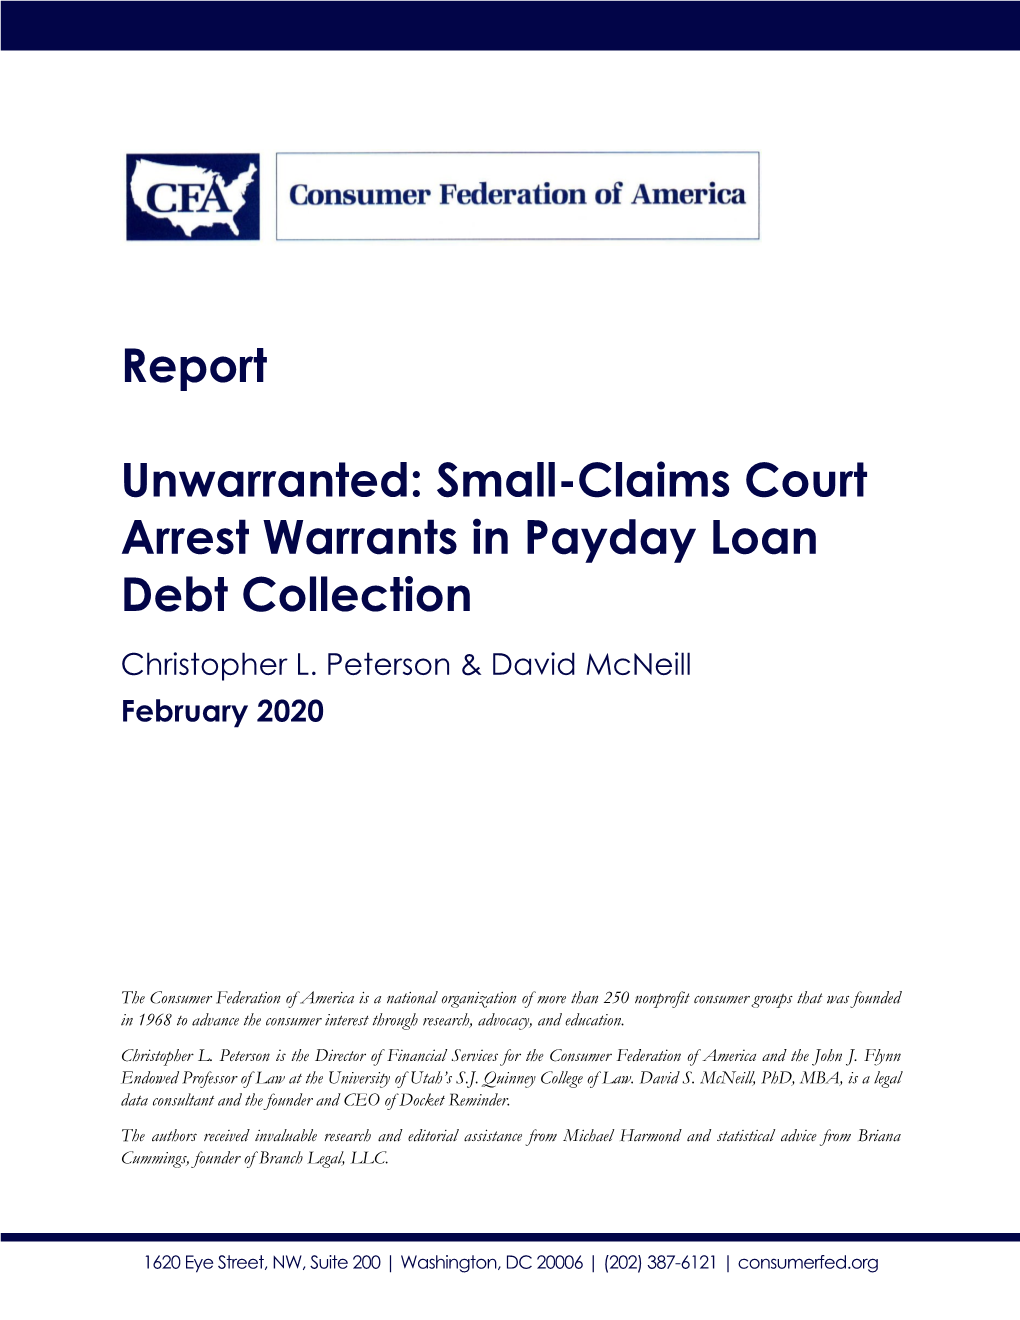 Small Claims Court Arrest Warrants in Payday Loan Debt Collection